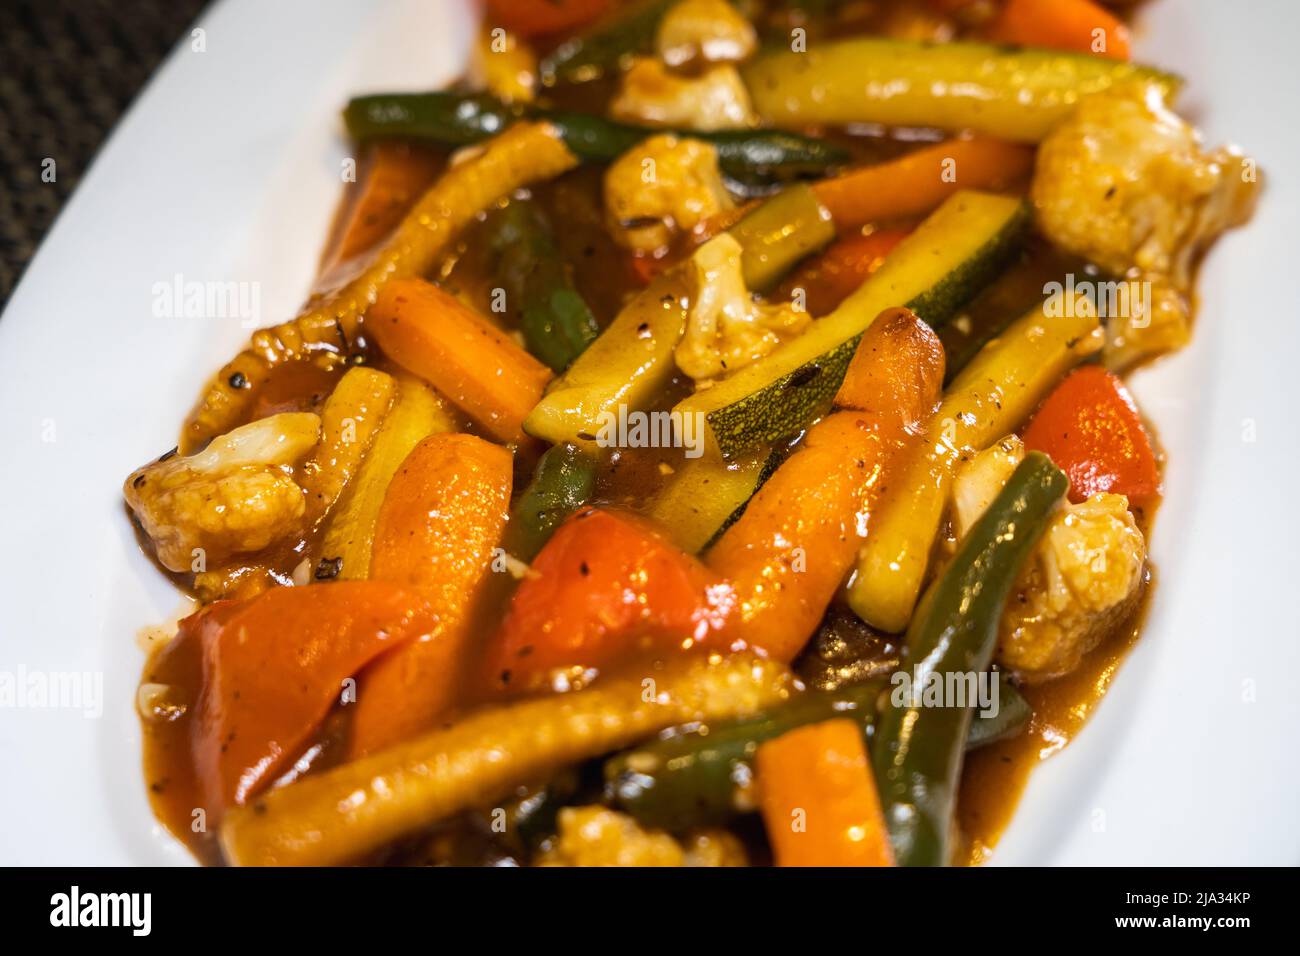 Sautéd exotic vegetables - Zucchini, Baby corn, Broccoli, Beans, Carrots, Mushrooms, Cauliflower and Bell Peppers mixed in black pepper sauce. Stock Photo